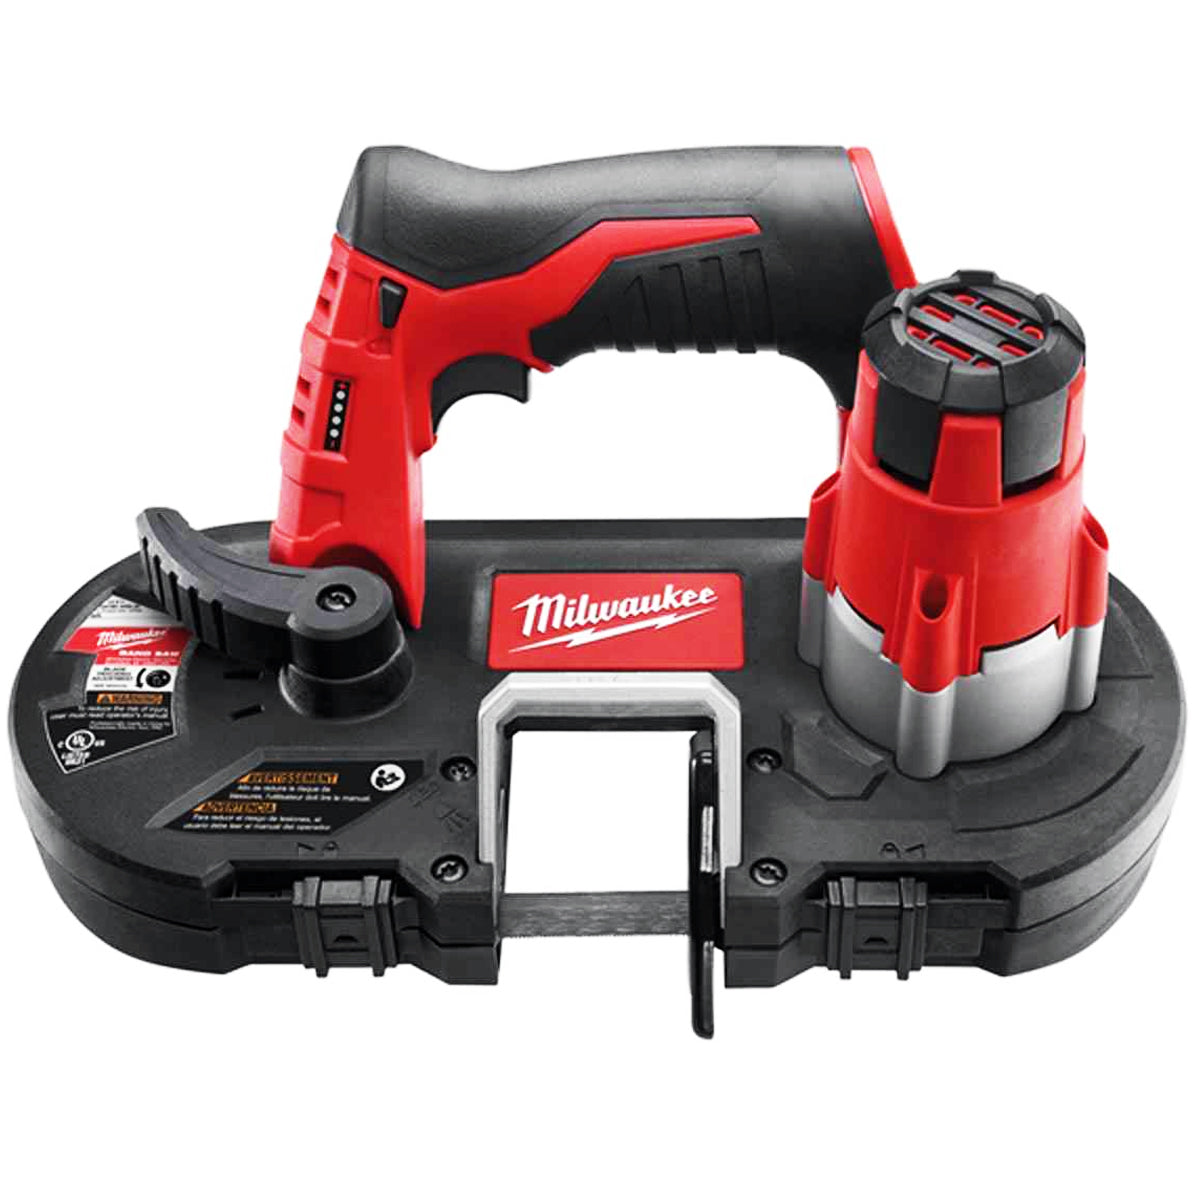 Milwaukee M12BS-0 12V Sub Compact Bandsaw with 2 x 4.0Ah Batteries & Charger